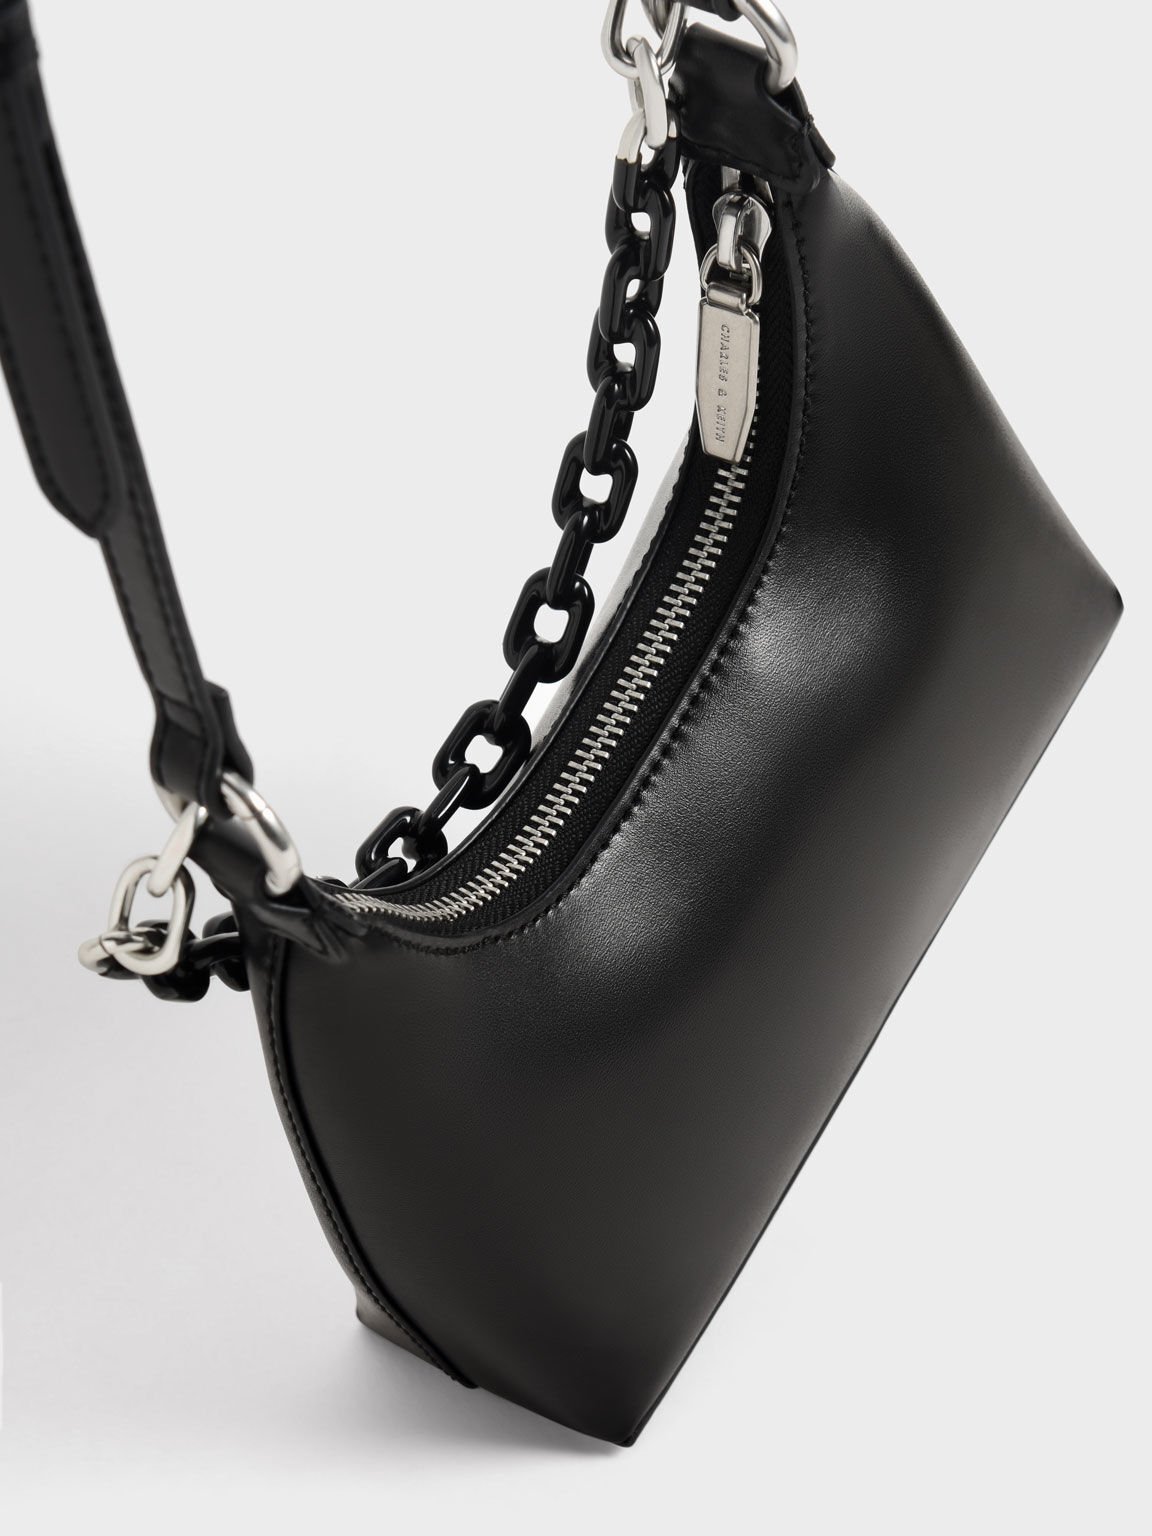 Women's Shoulder Bags | Exclusive Styles - CHARLES & KEITH NL